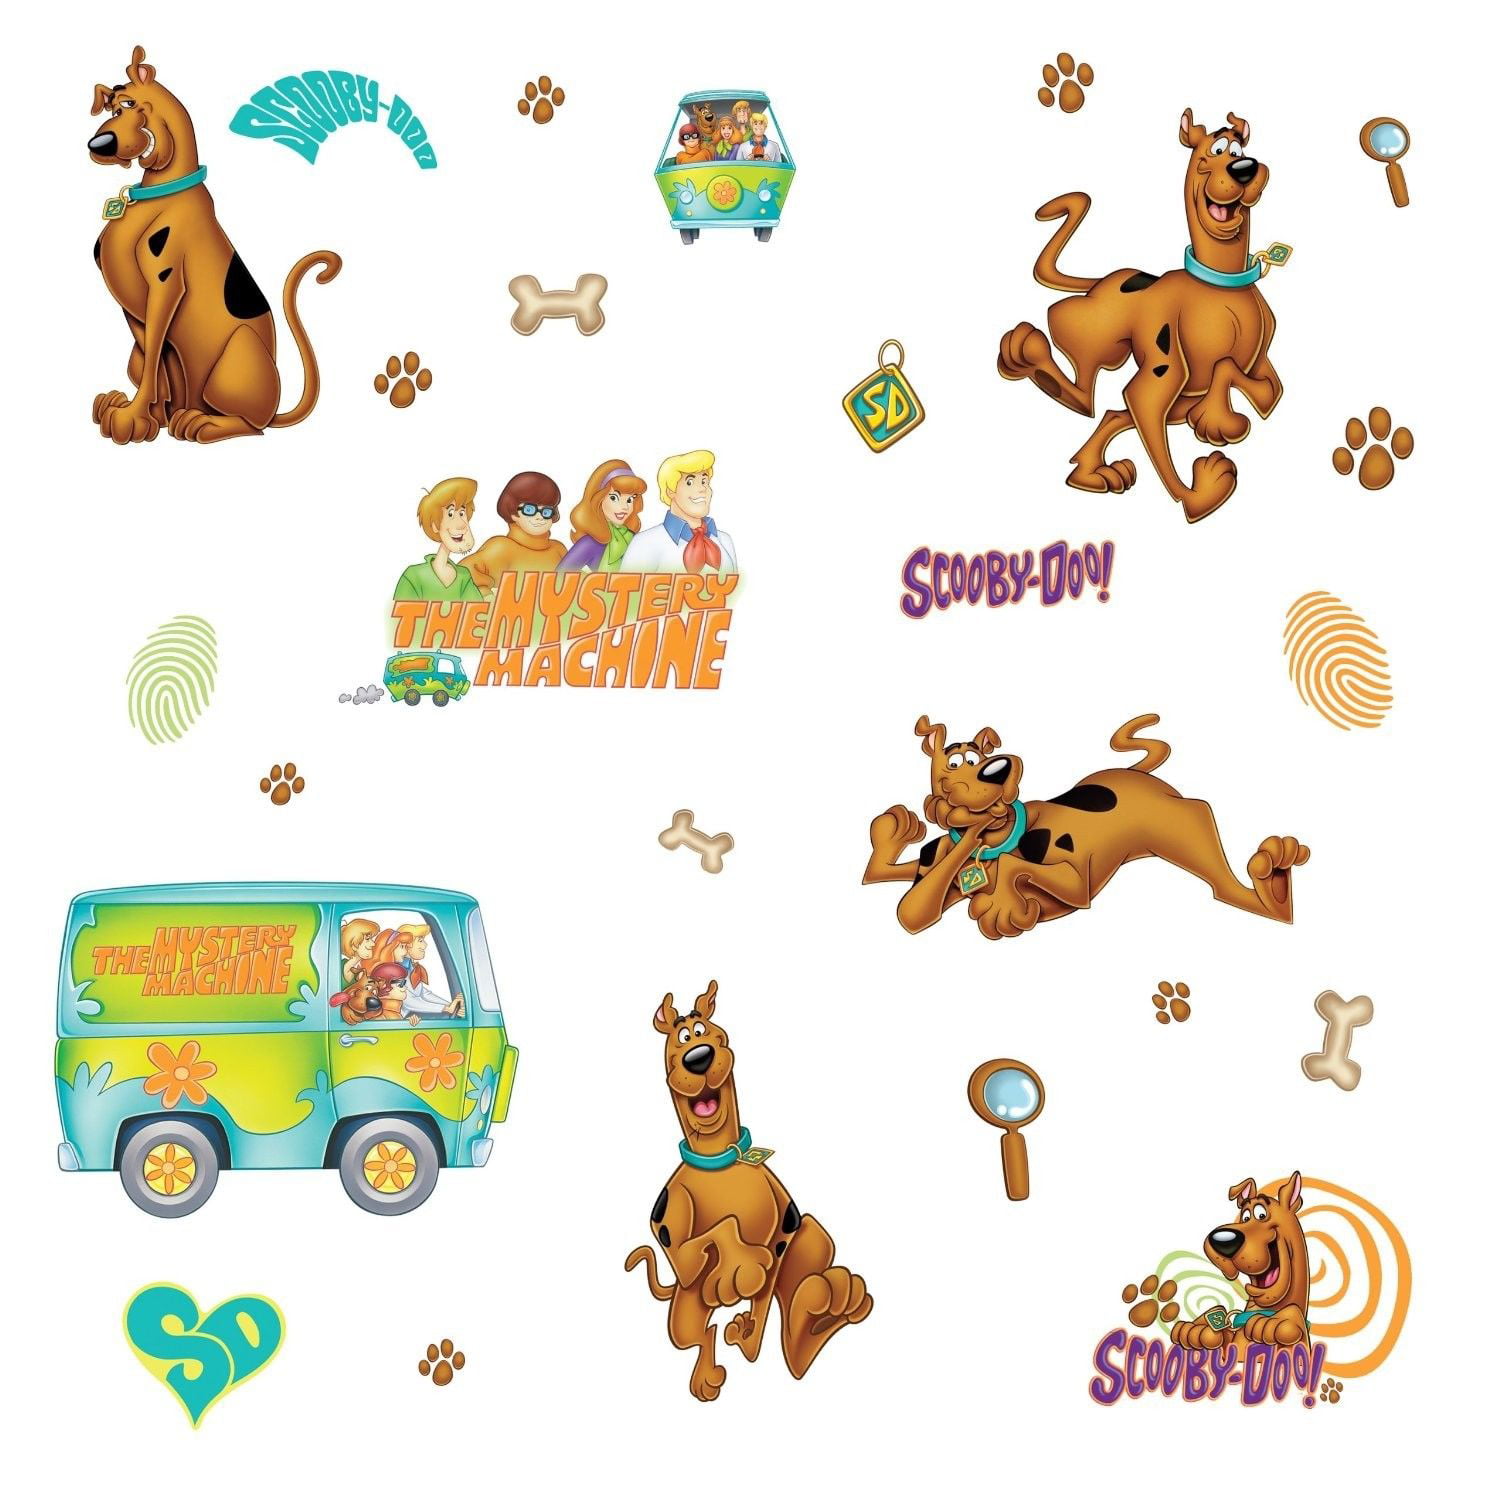 scooby-doo-26-big-wall-stickers-room-decor-mystery-machine-decals